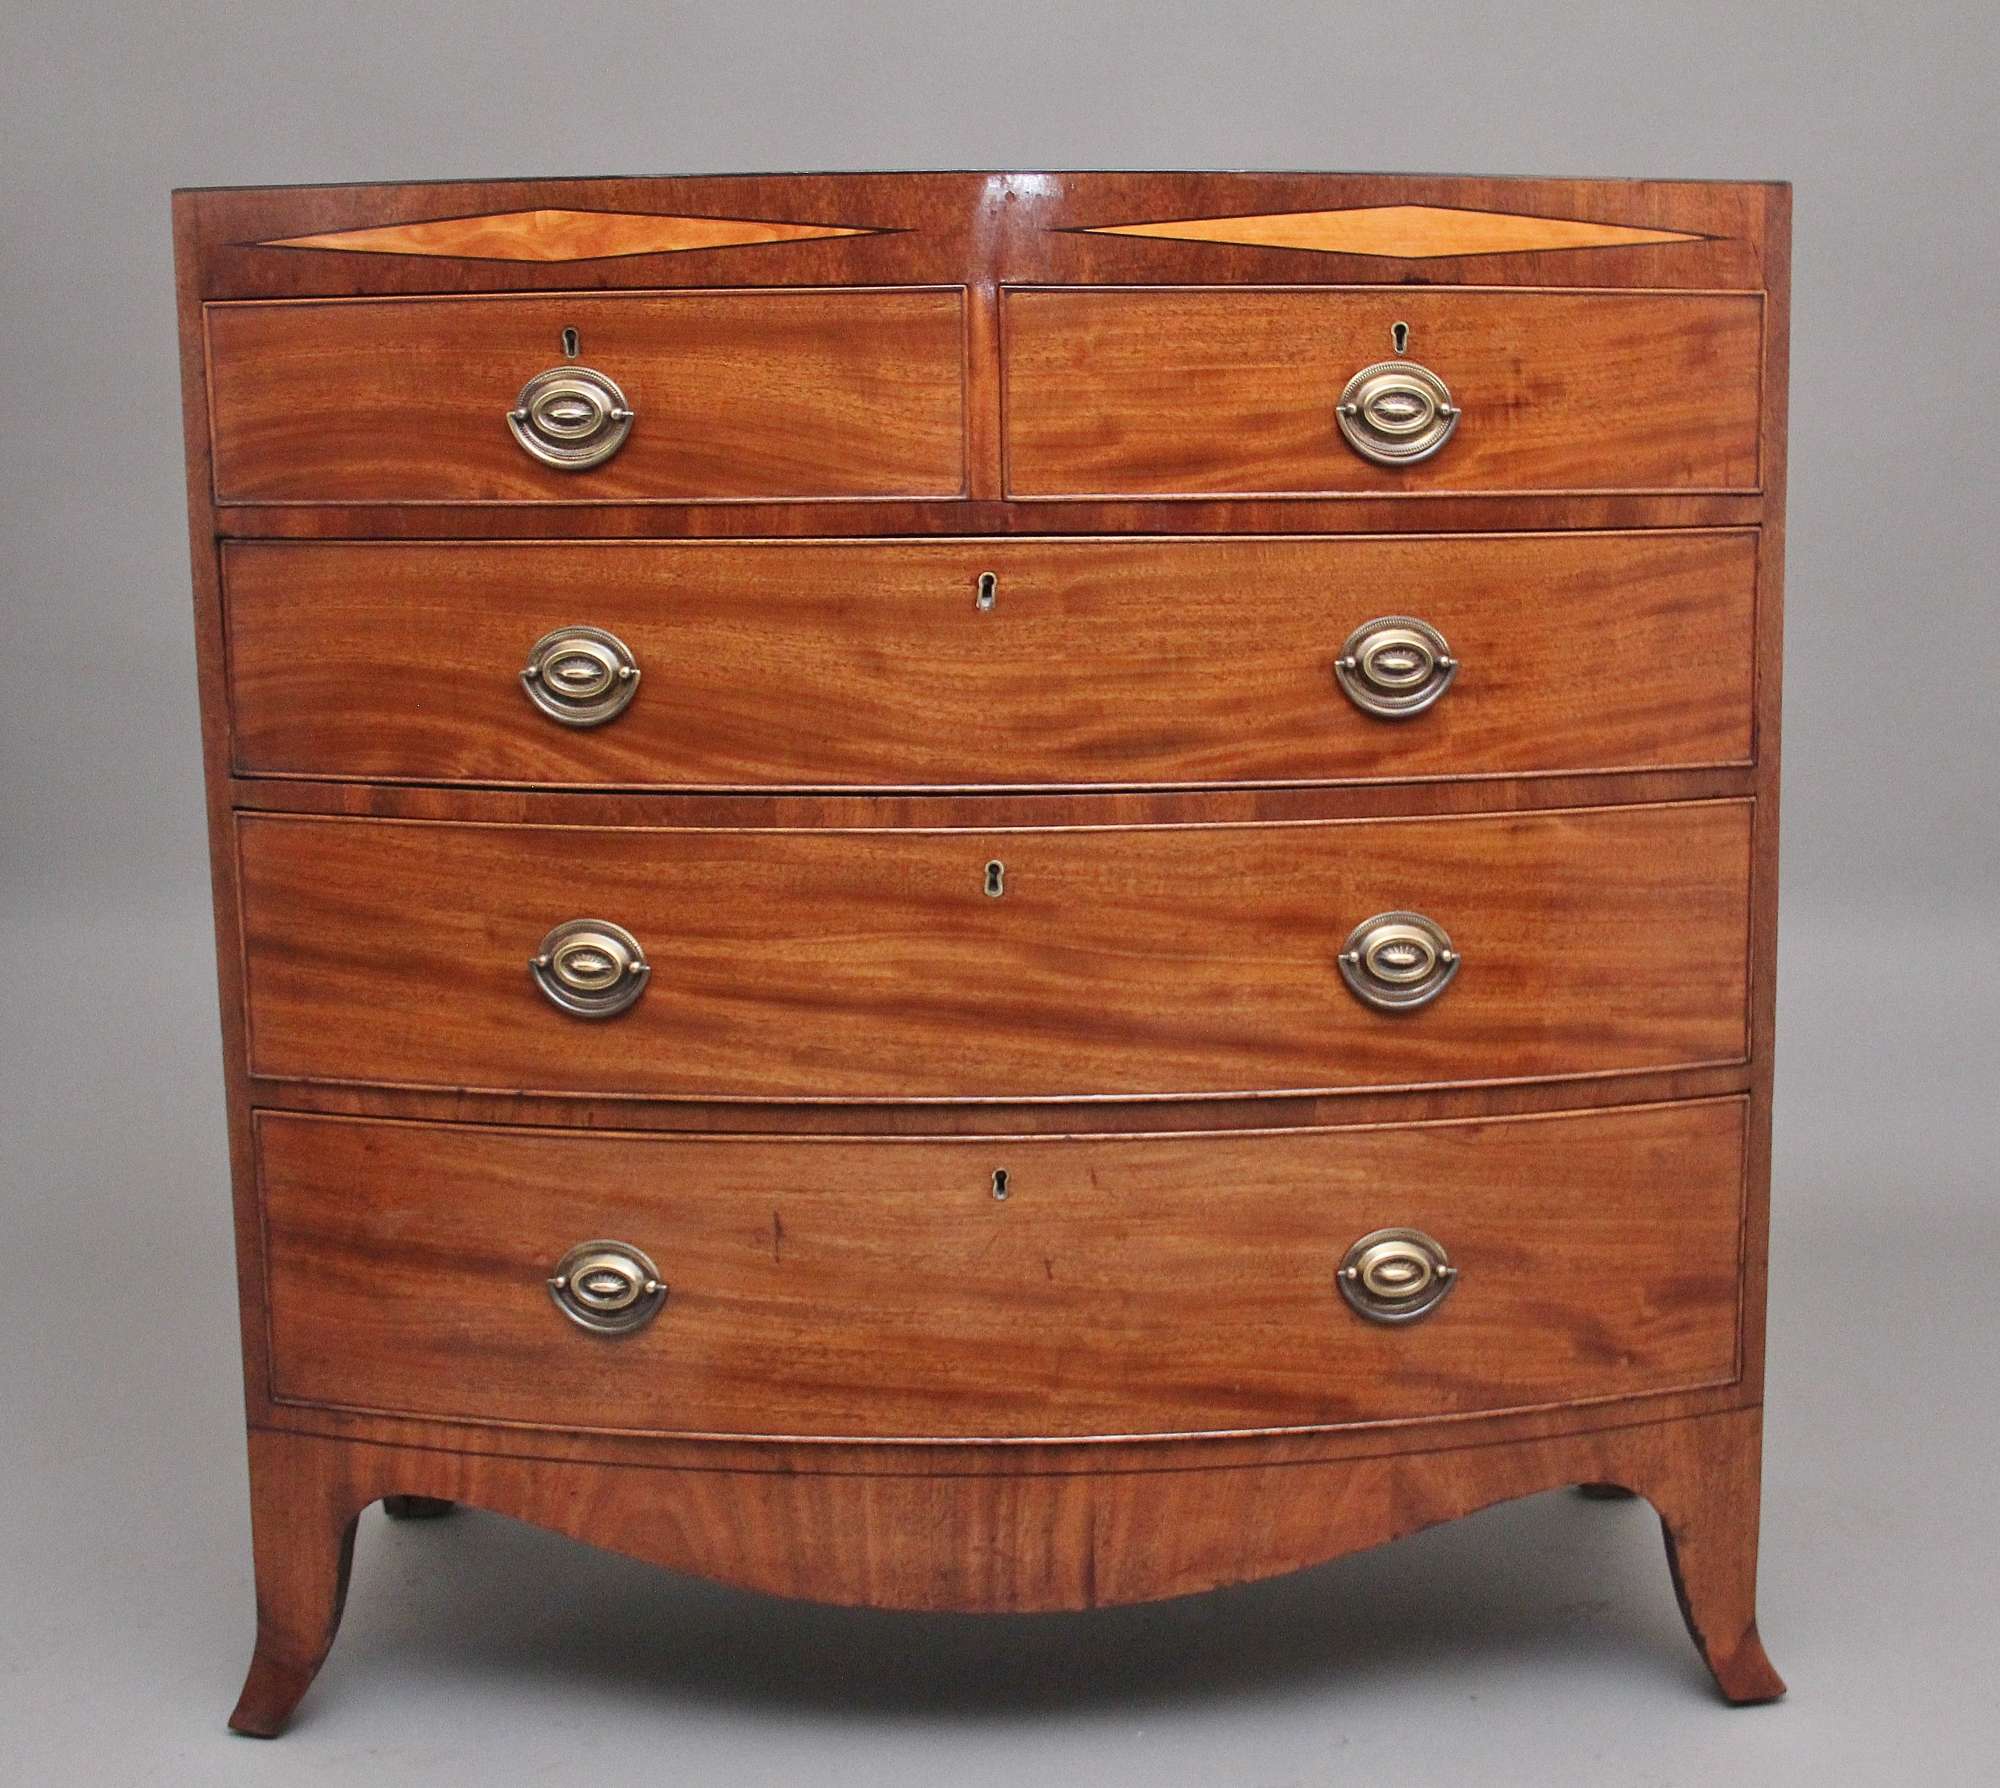 Early 19th Century Antique Mahogany Chest Of Drawers